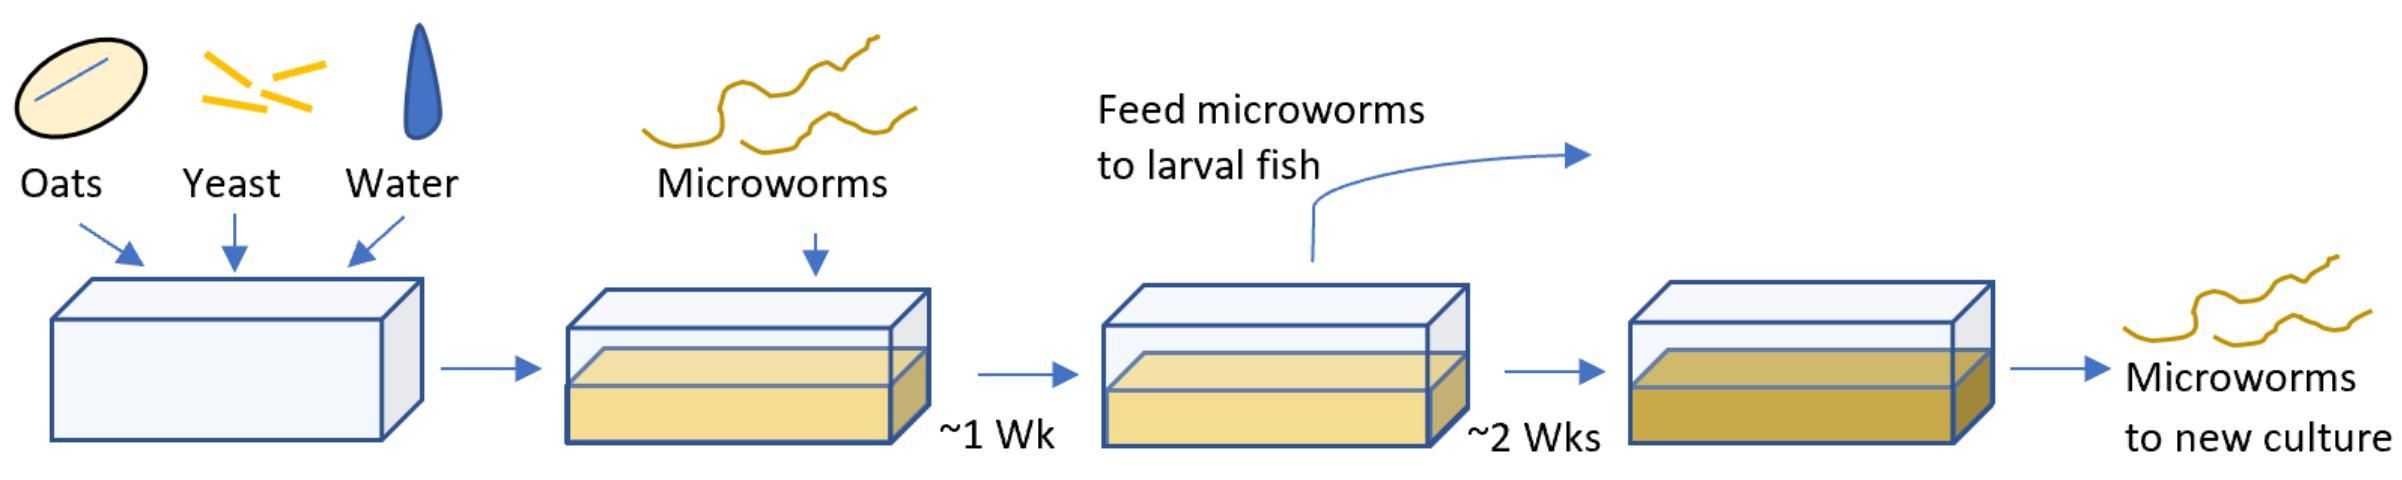 Figure 2. Schematic of a microworm culture cycle.